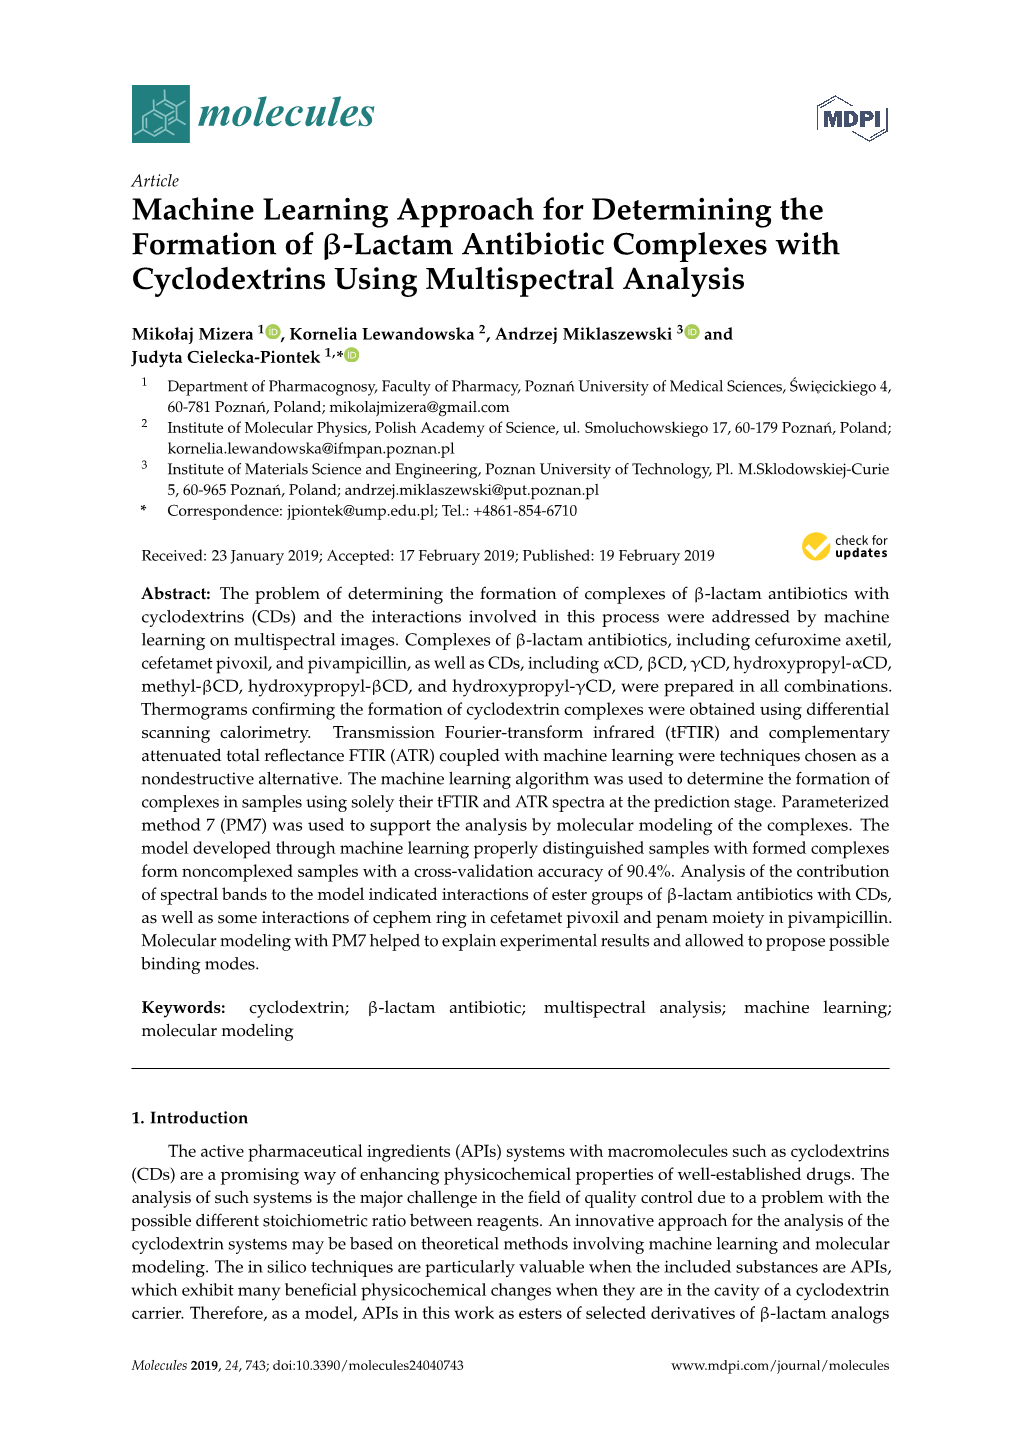 Machine Learning Approach for Determining the Formation of Β-Lactam Antibiotic Complexes with Cyclodextrins Using Multispectral Analysis